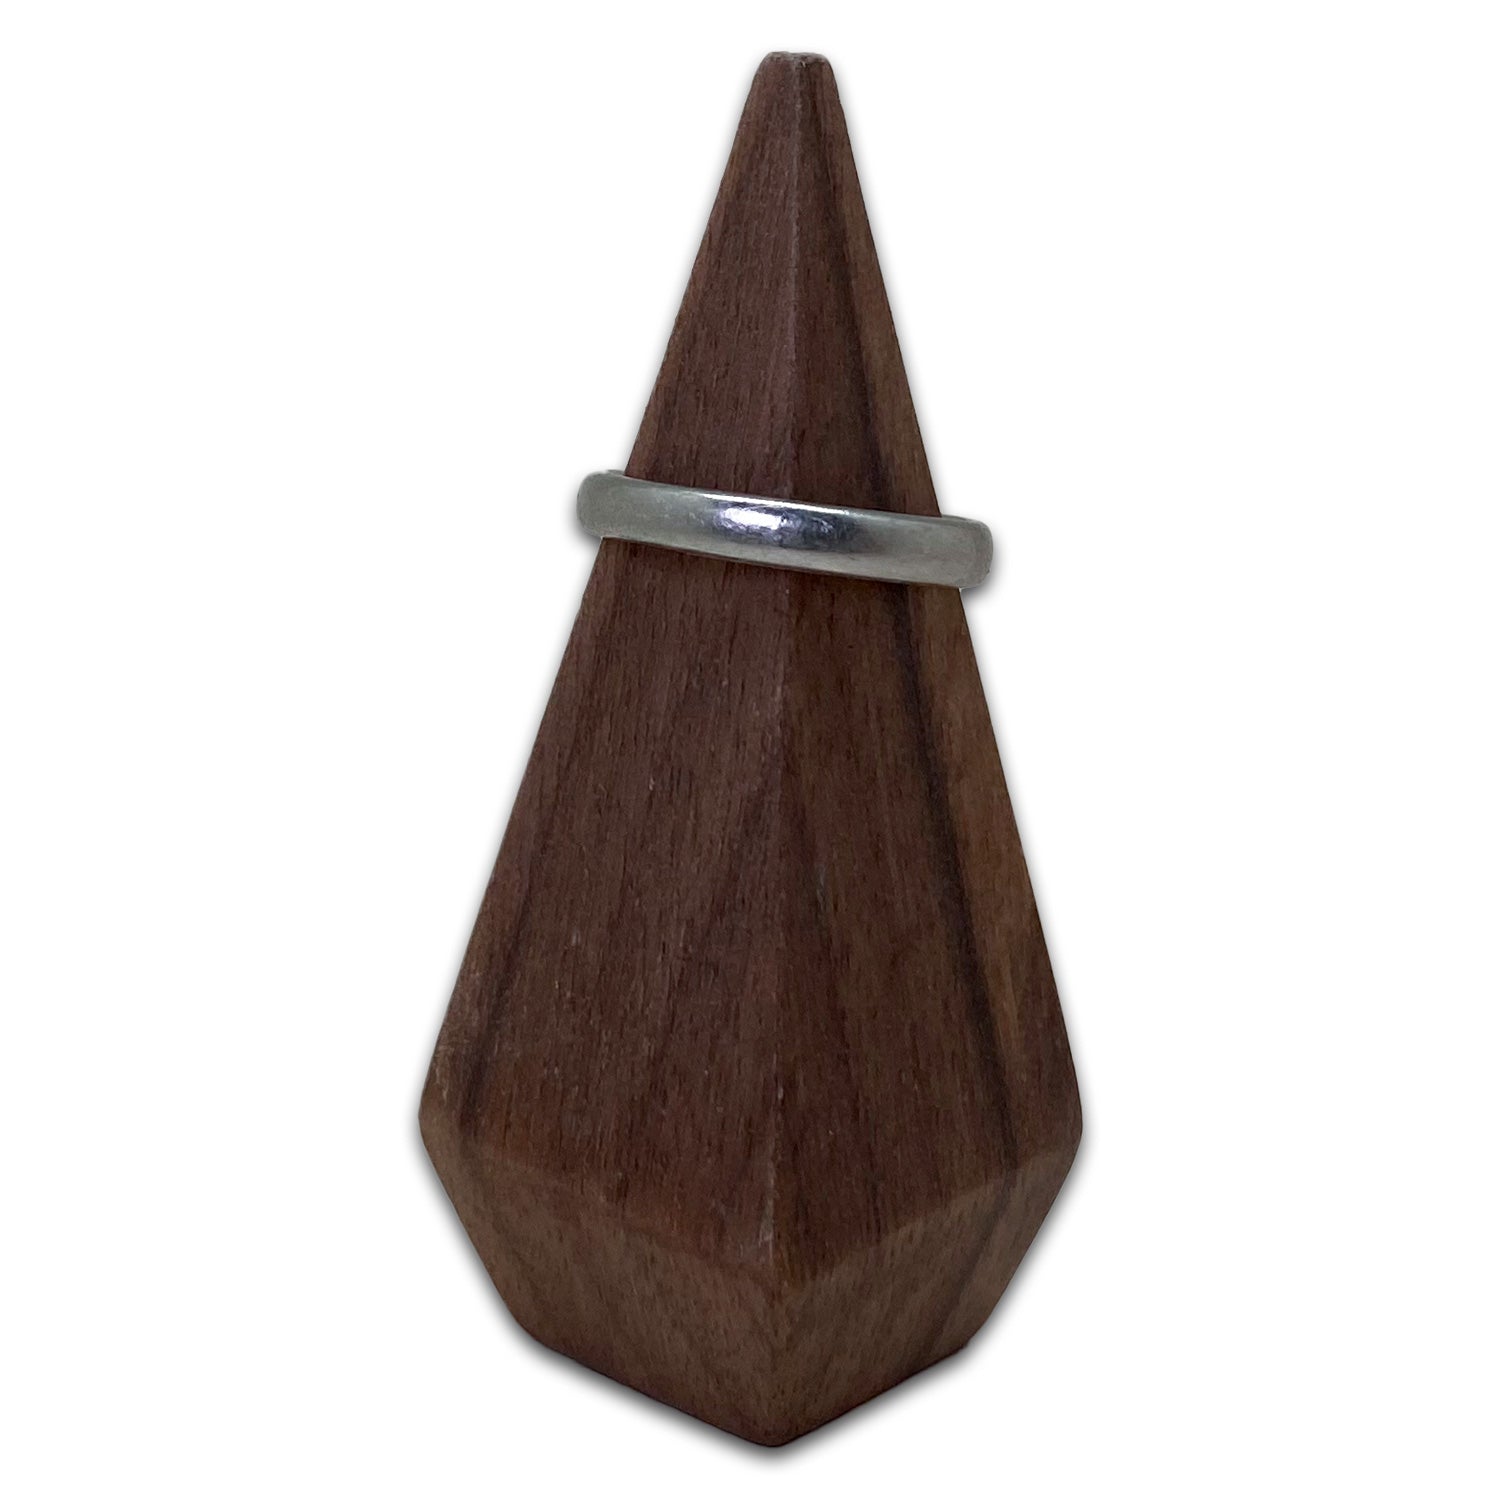 Single Finger Wood Pyramid Ring Stand Display